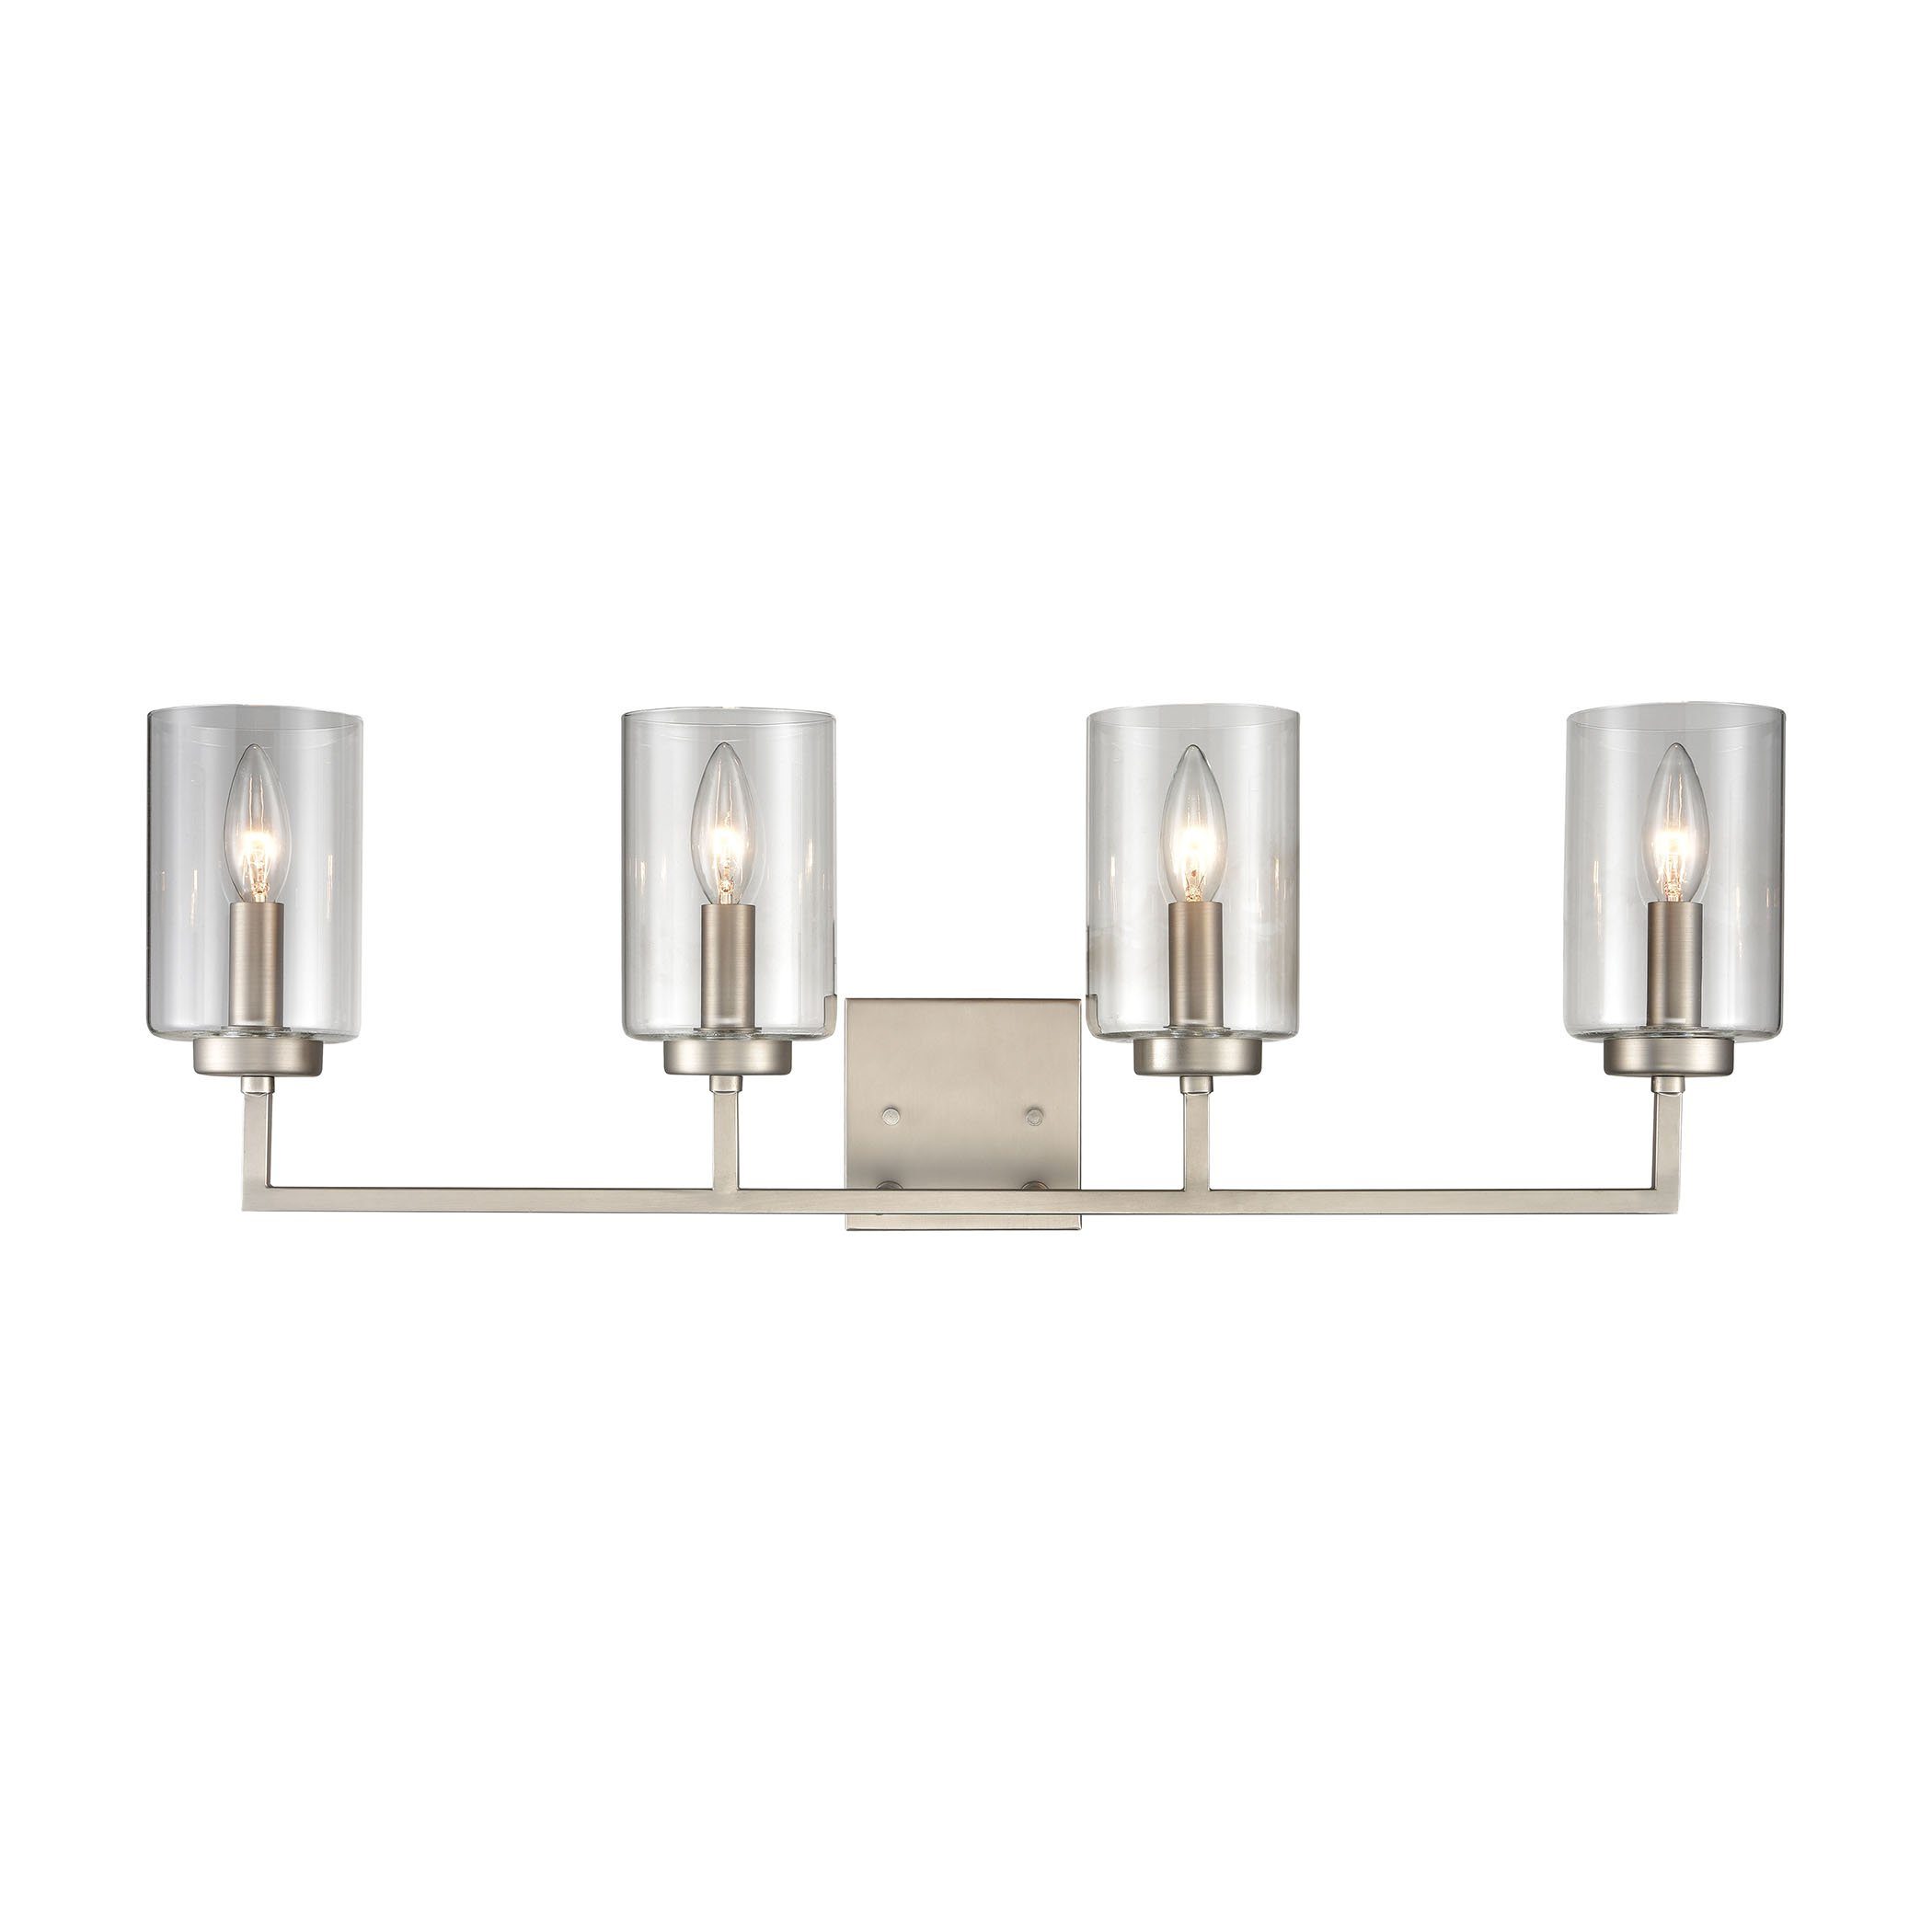 West End 4-Light Bath Light in Brushed Nickel Wall Thomas Lighting 